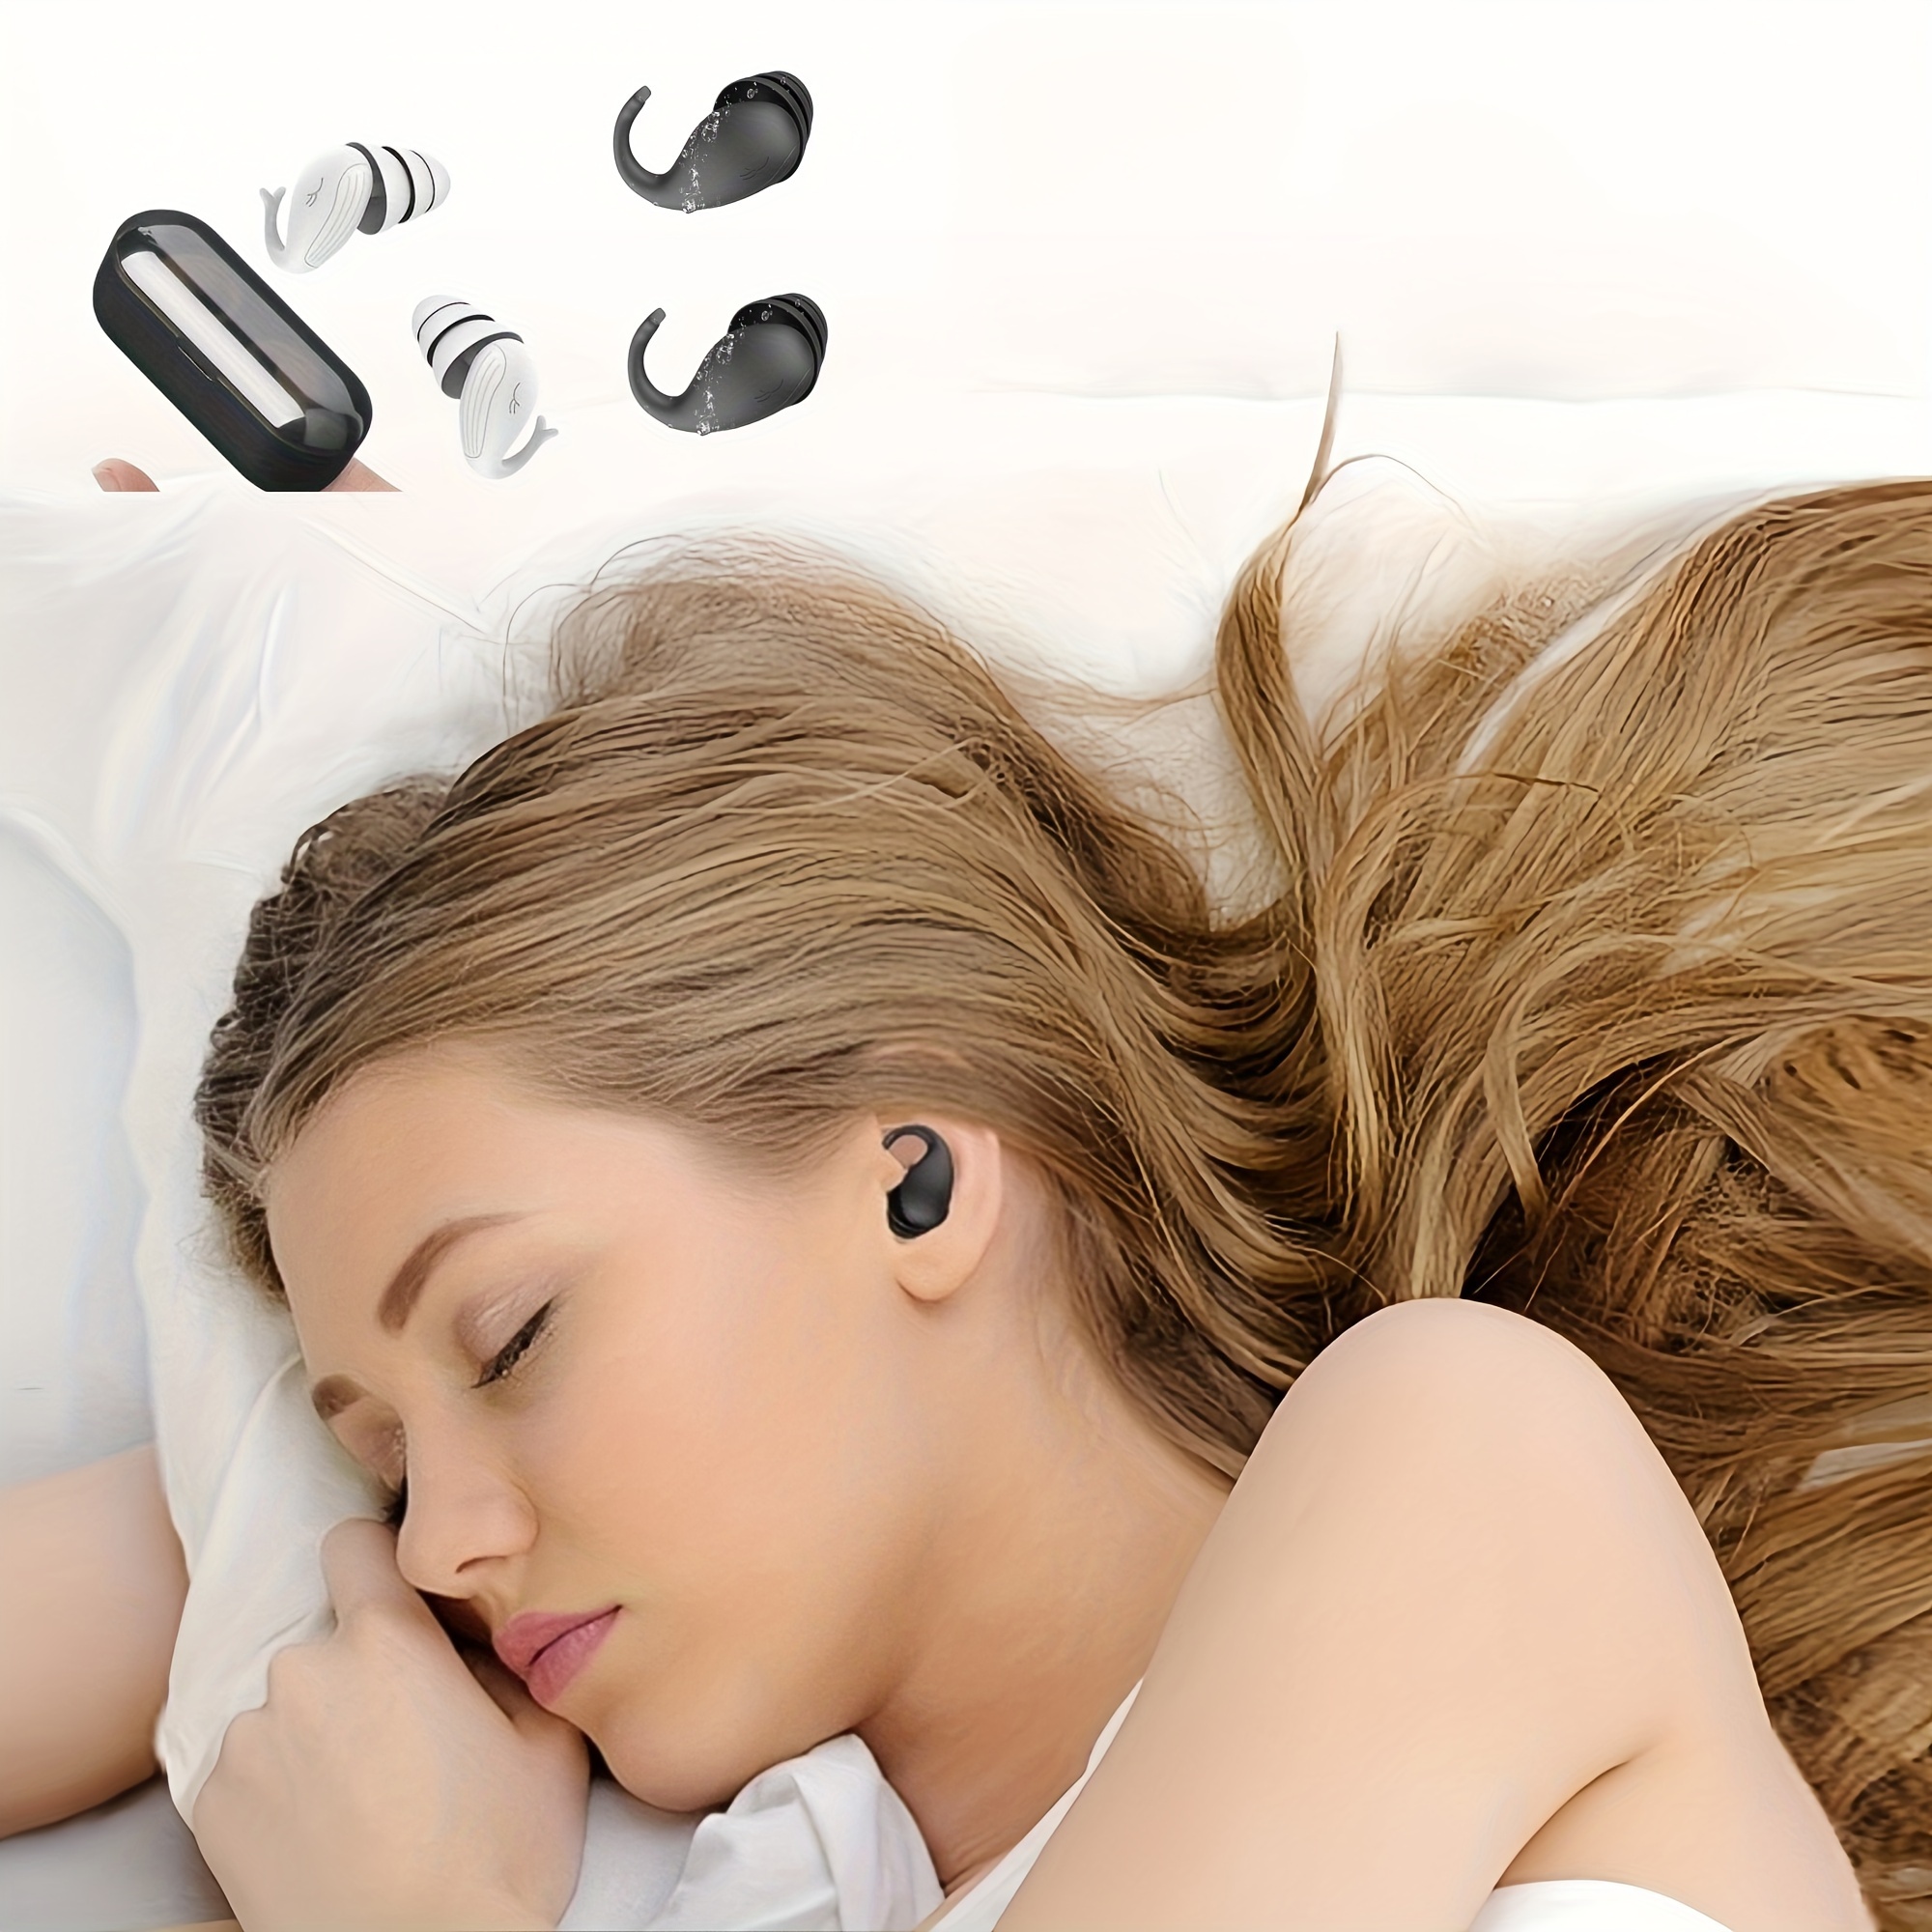 

Dolphin Design Noise Cancelling Earplugs - Silicone & Plastic Anti-snoring , Multi-layer Sound Insulation Ear Plugs For Sleep, Study, Work – Unscented, Power-free, Non-rechargeable - 1 Pair